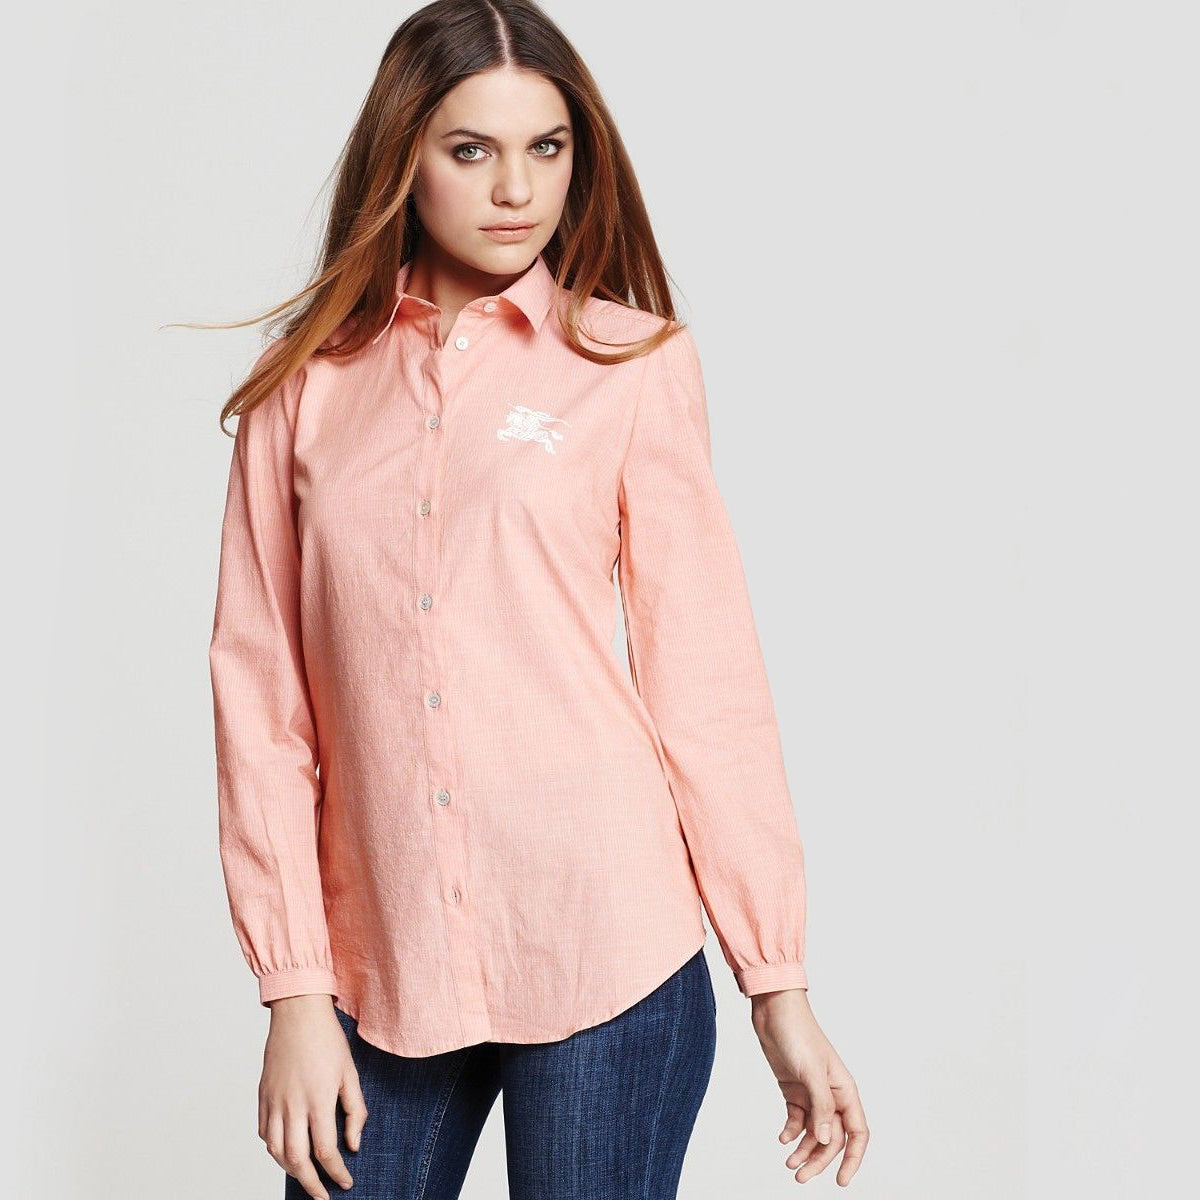 Burberry Brit Pink Striped Shirt - size Large